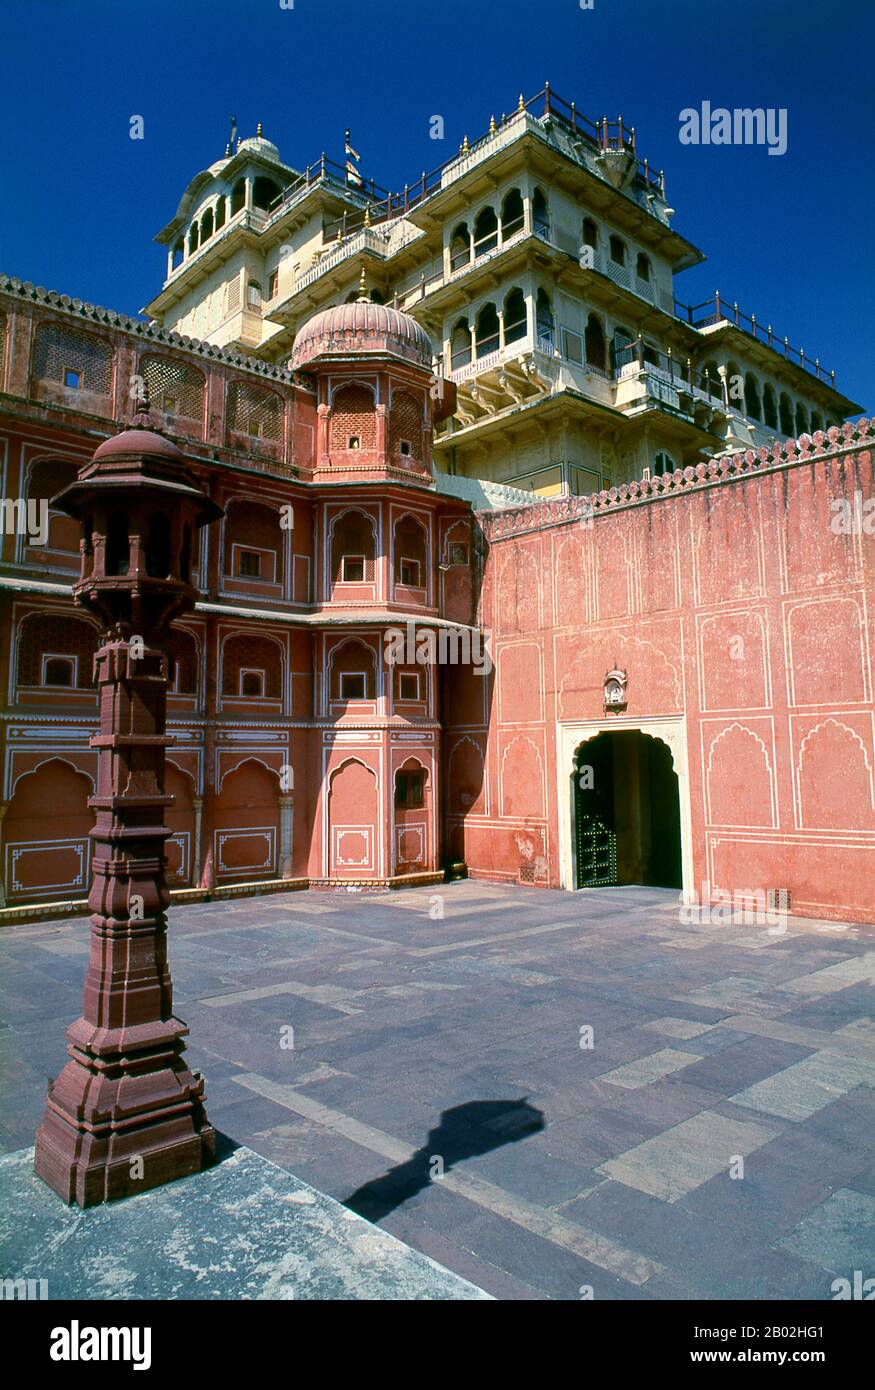 The City Palace was built between 1729 and 1732, initially by Maharaja Sawai Jai Singh II. He planned and built the outer walls, and later additions were made by successive rulers right up to the 20th century.  Jaipur is the capital and largest city of the Indian state of Rajasthan. It was founded on 18 November 1727 by Maharaja Sawai Jai Singh II, the ruler of Amber, after whom the city was named. The city today has a population of 3.1 million. Jaipur is known as the Pink City of India.  The city is remarkable among pre-modern Indian cities for the width and regularity of its streets which ar Stock Photo